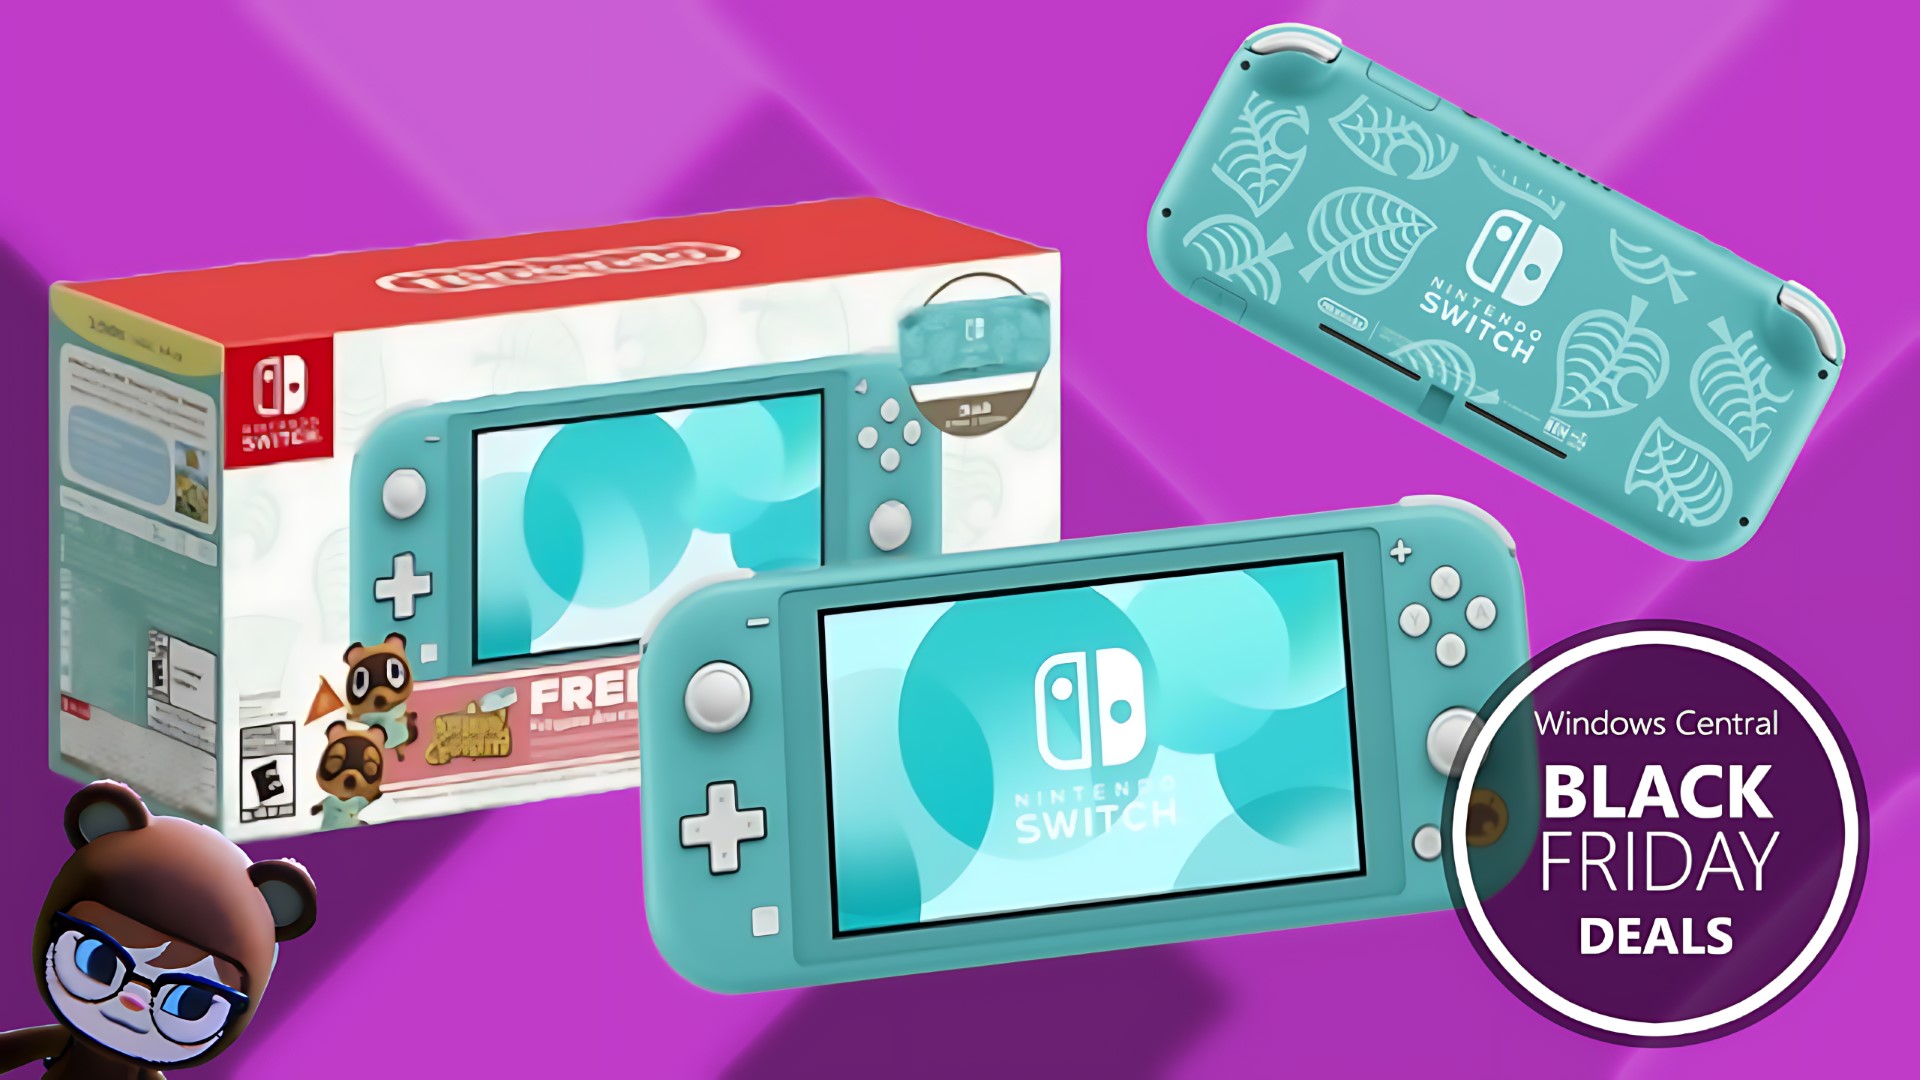  Nintendo Switch Lite - Turquoise : Video Games